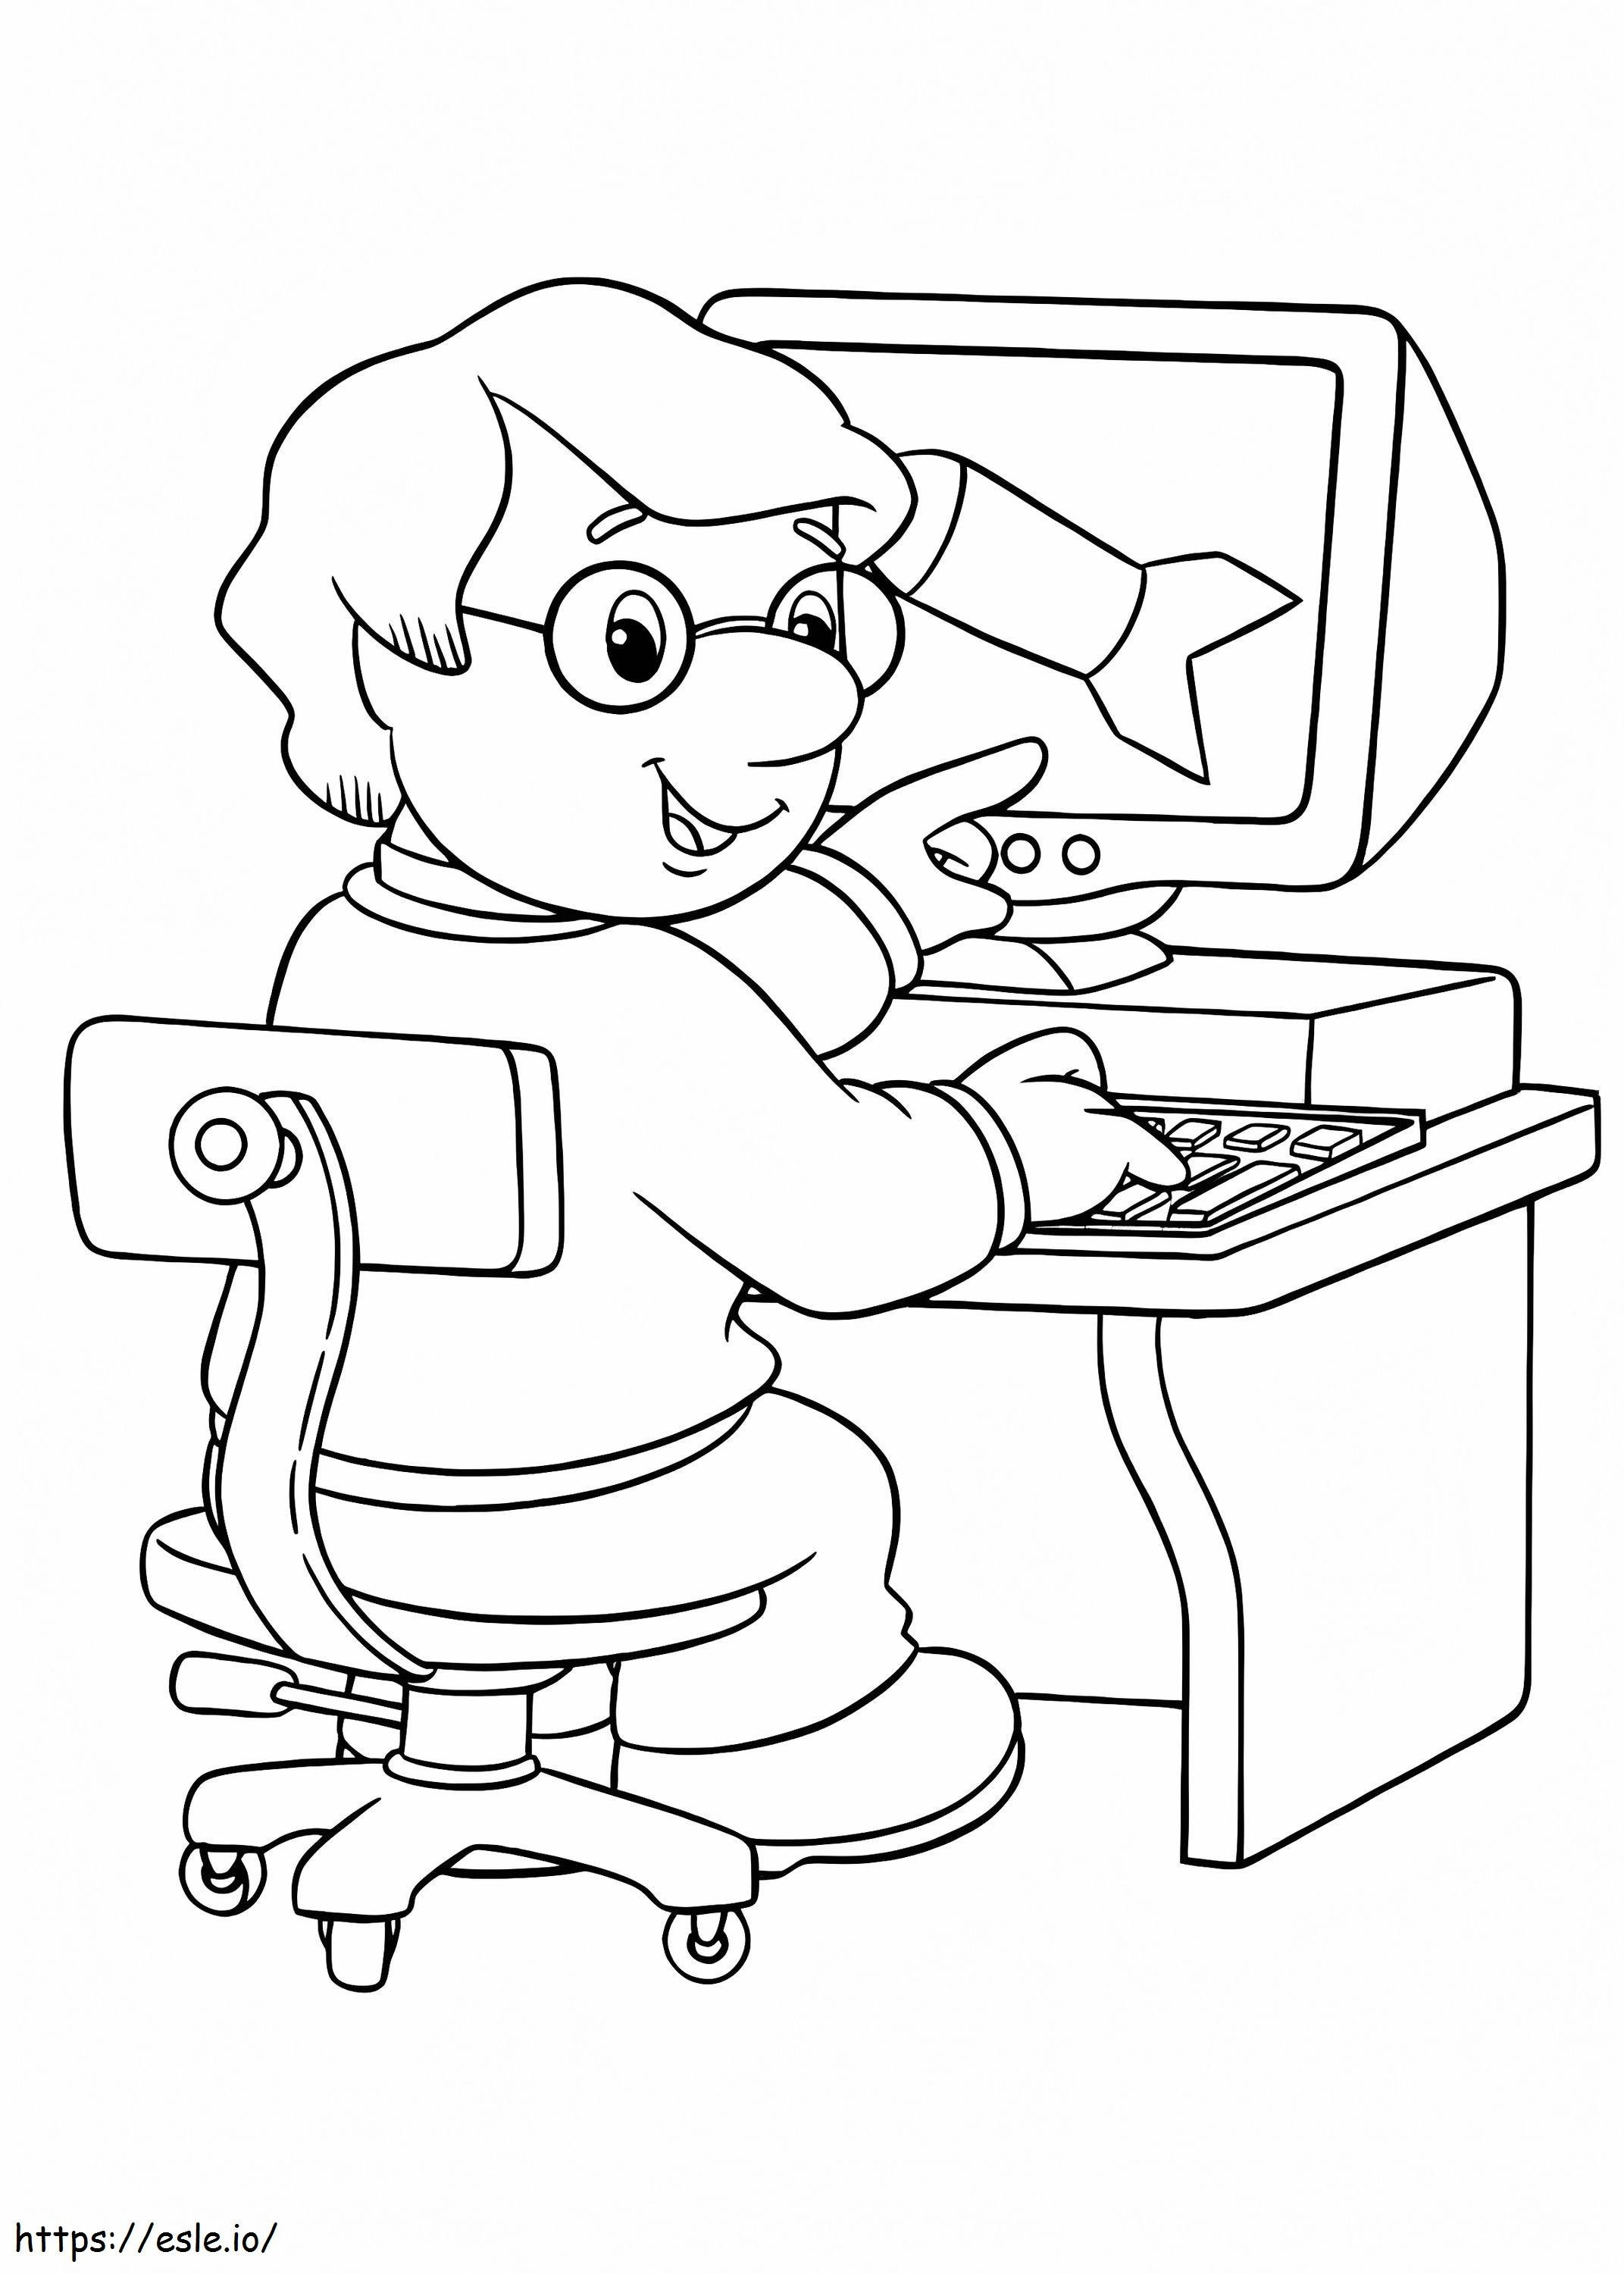 Studying On Computer coloring page